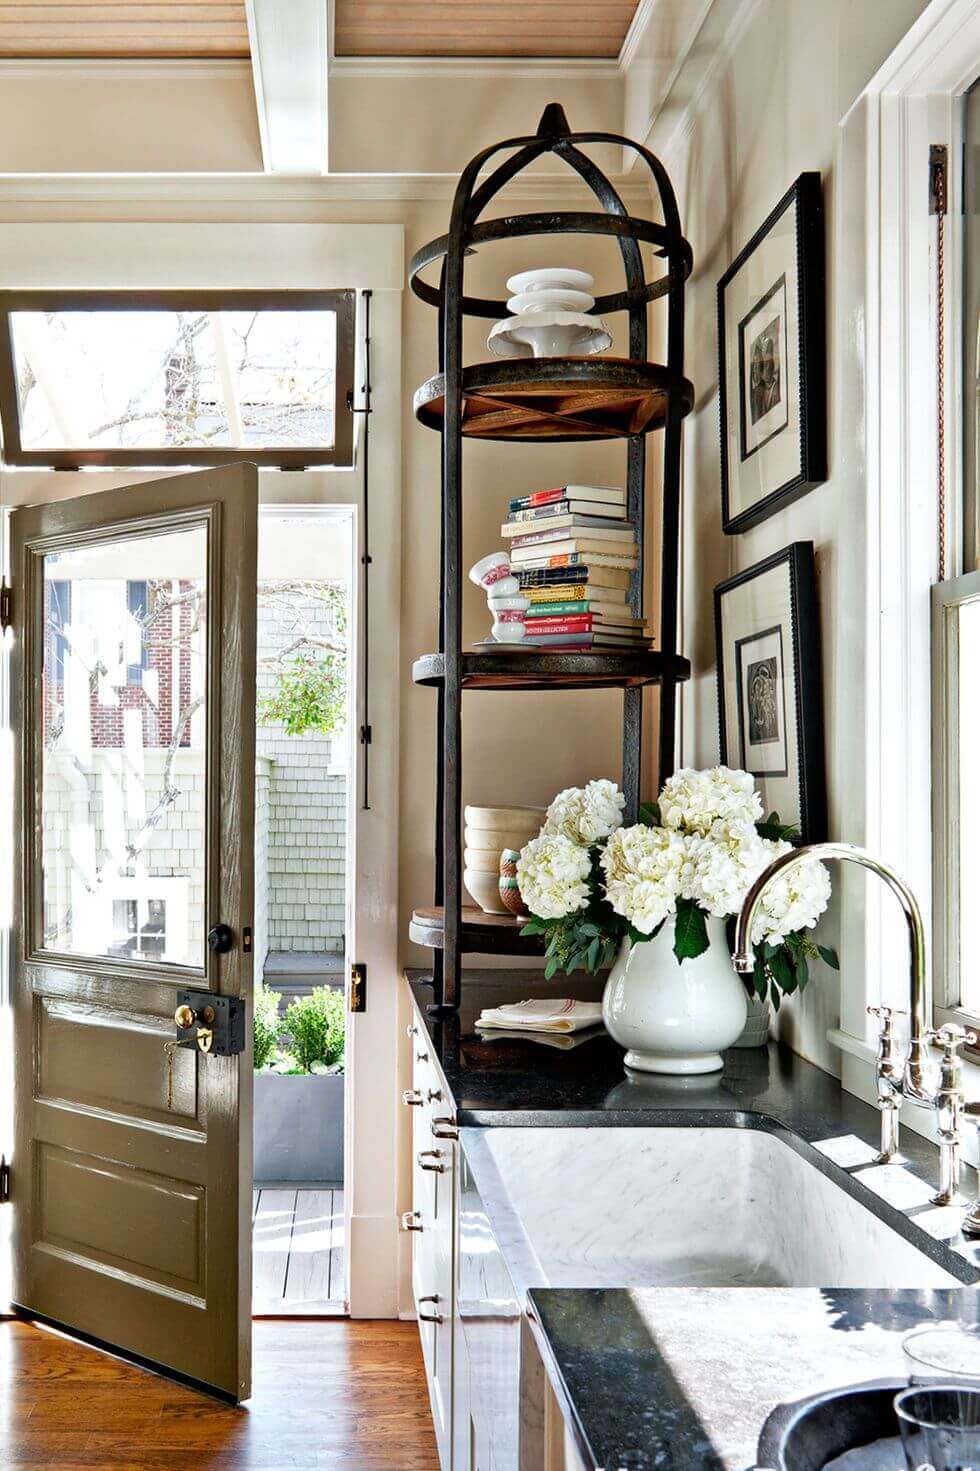 Clever Kitchen Storage Ideas 30 Try An Etagere